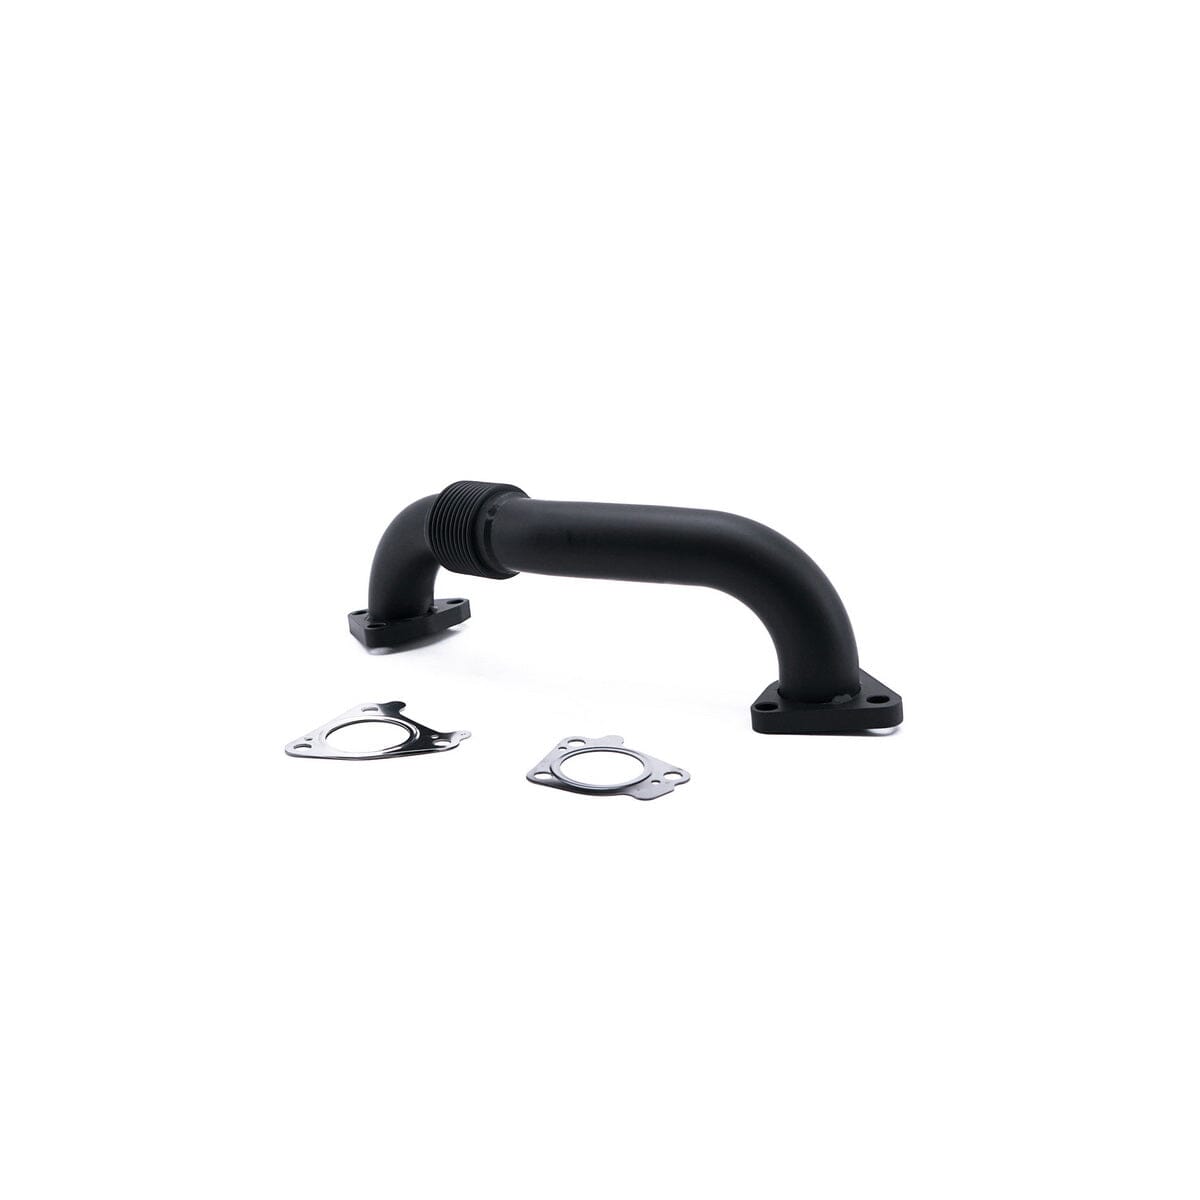 HSP 2 Inch Replacement Driver Side Up-Pipe (2001-2016 Silverado/Sierra) Up-pipes HSP Diesel Ceramic Coat 